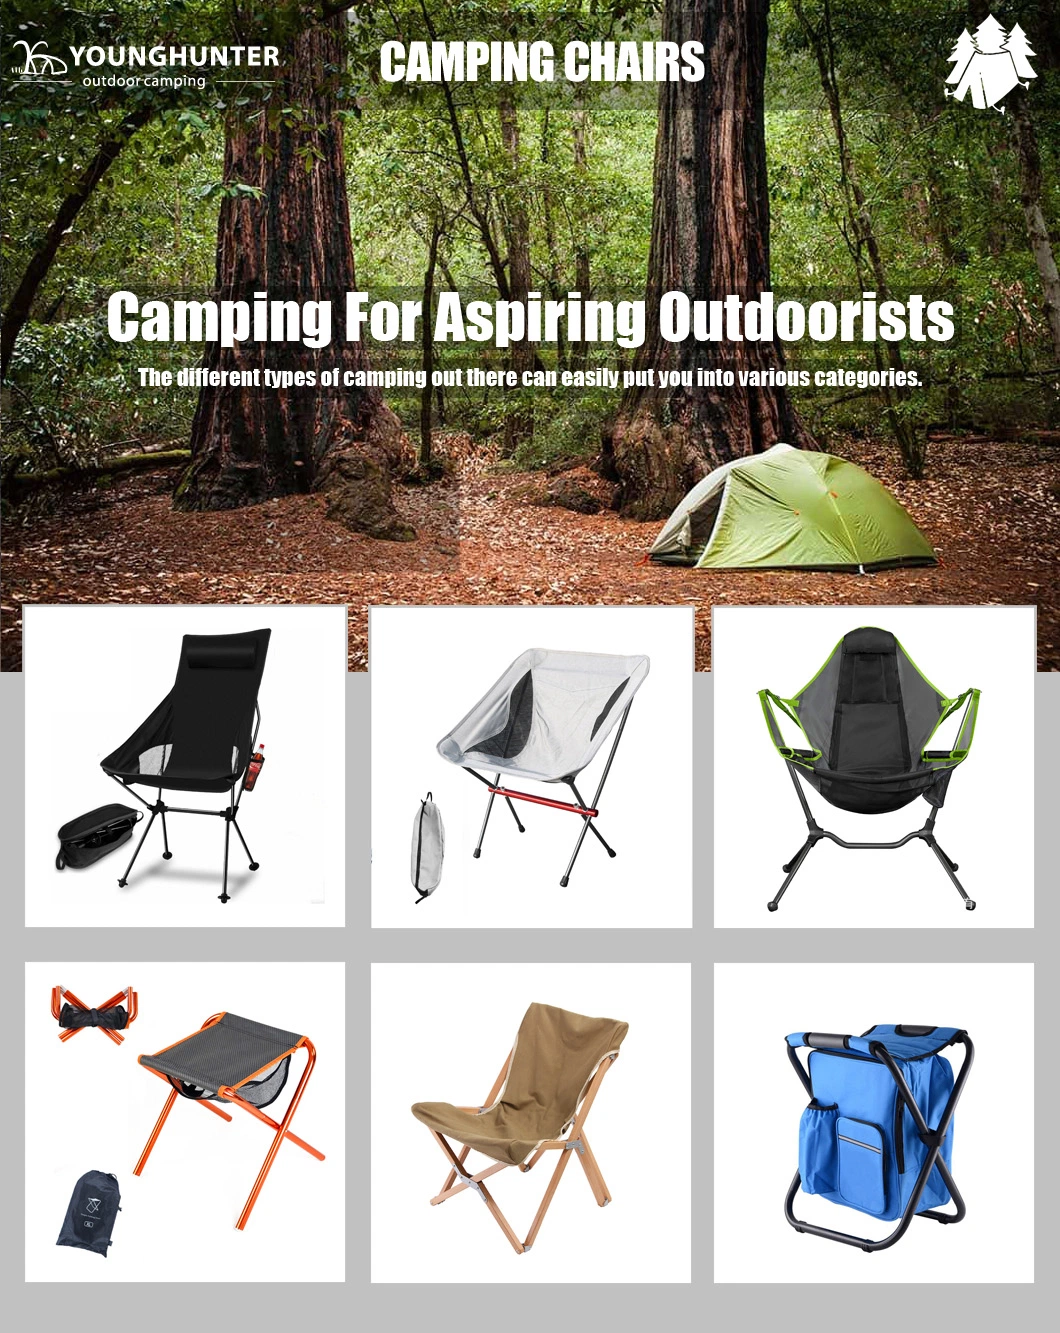 Outdoor Pod Rocker Collapsible Camping Portable Folding Rocking Chair for Fishing